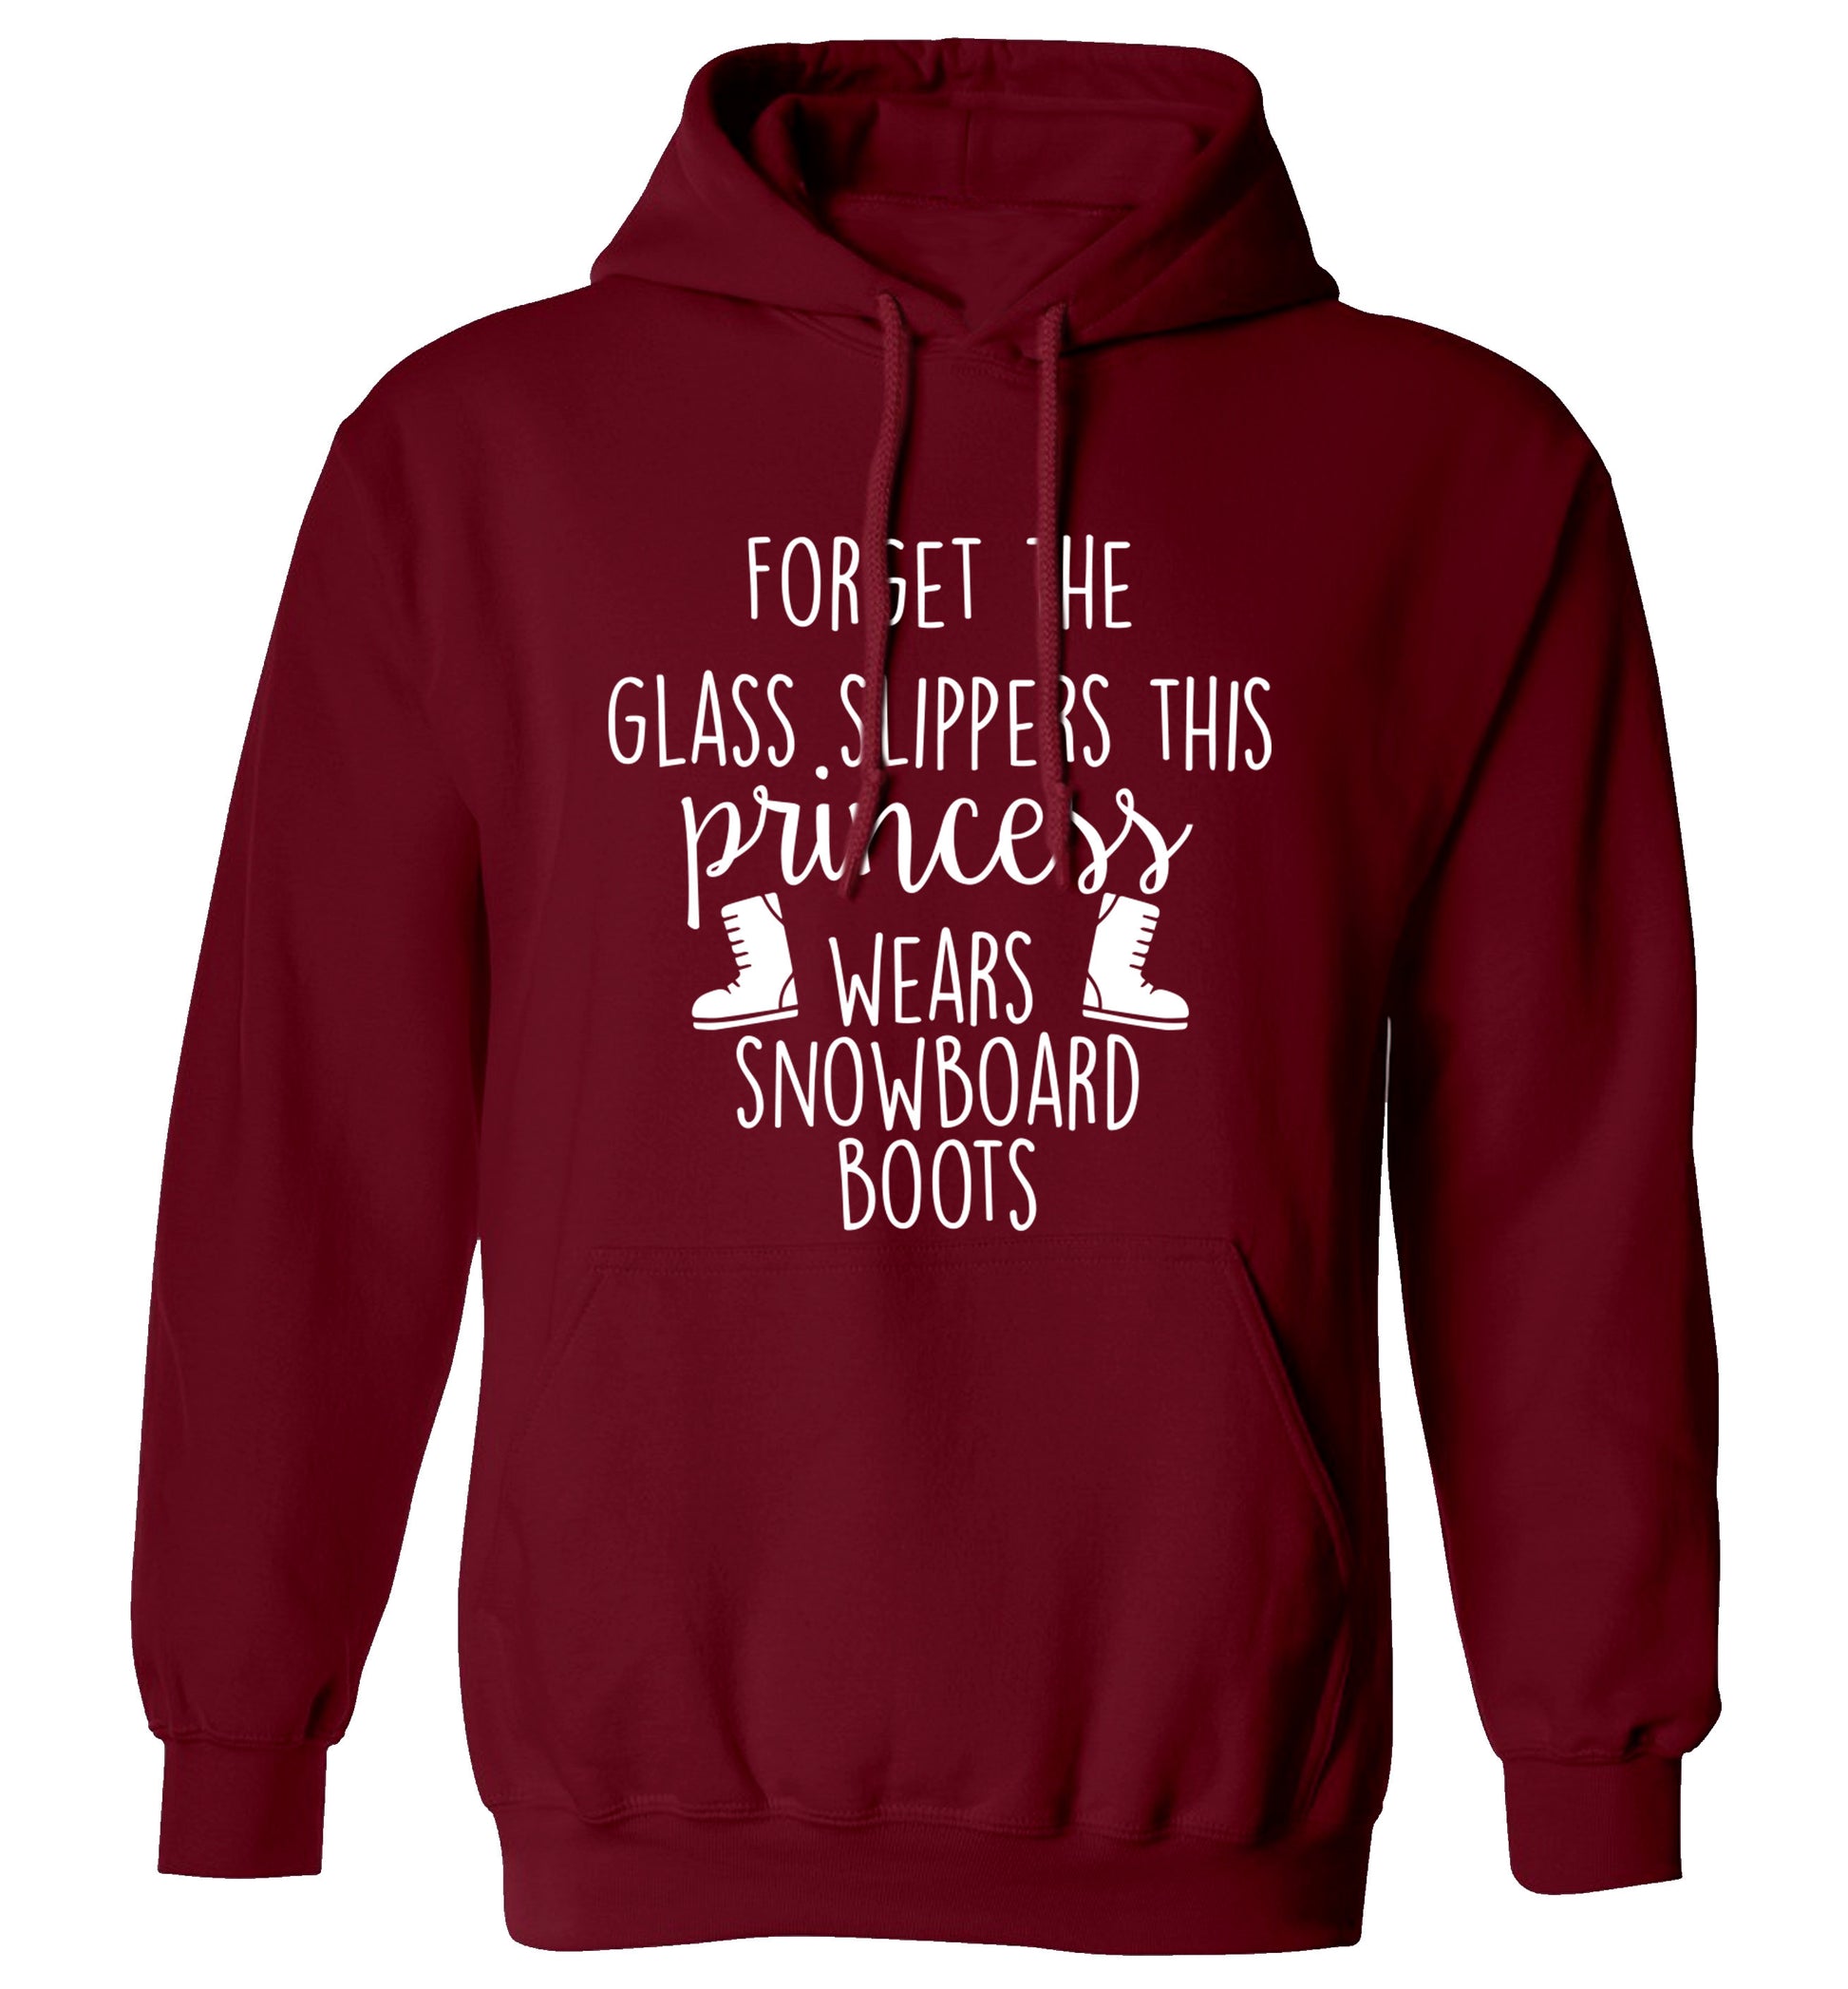 Forget the glass slippers this princess wears snowboard boots adults unisex maroon hoodie 2XL